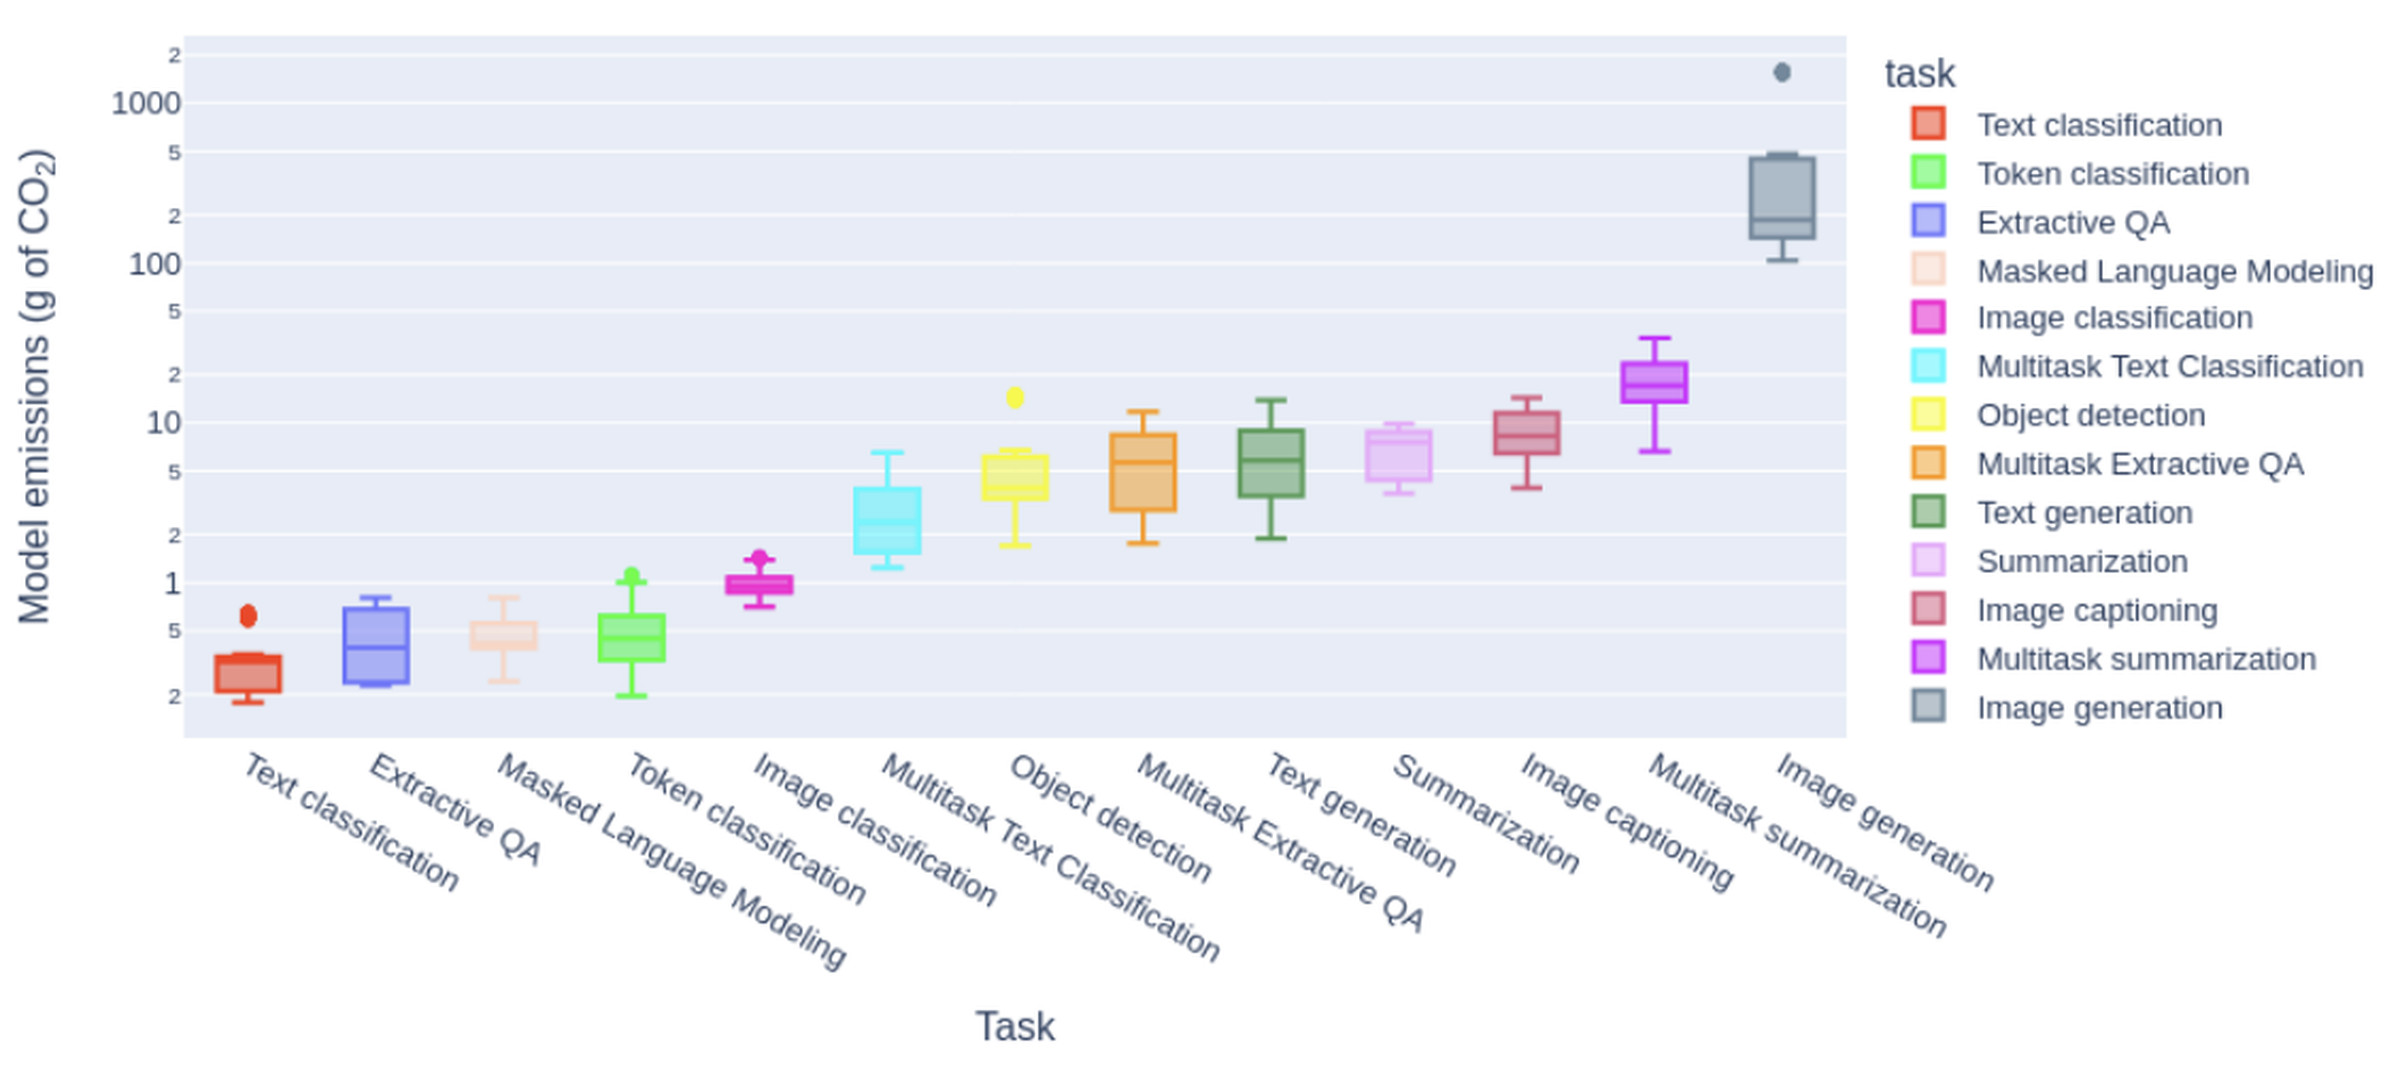 A chart showing the cost of different generative AI tasks — image generation sits at the high end, generating significantly more CO2 than text classification models.